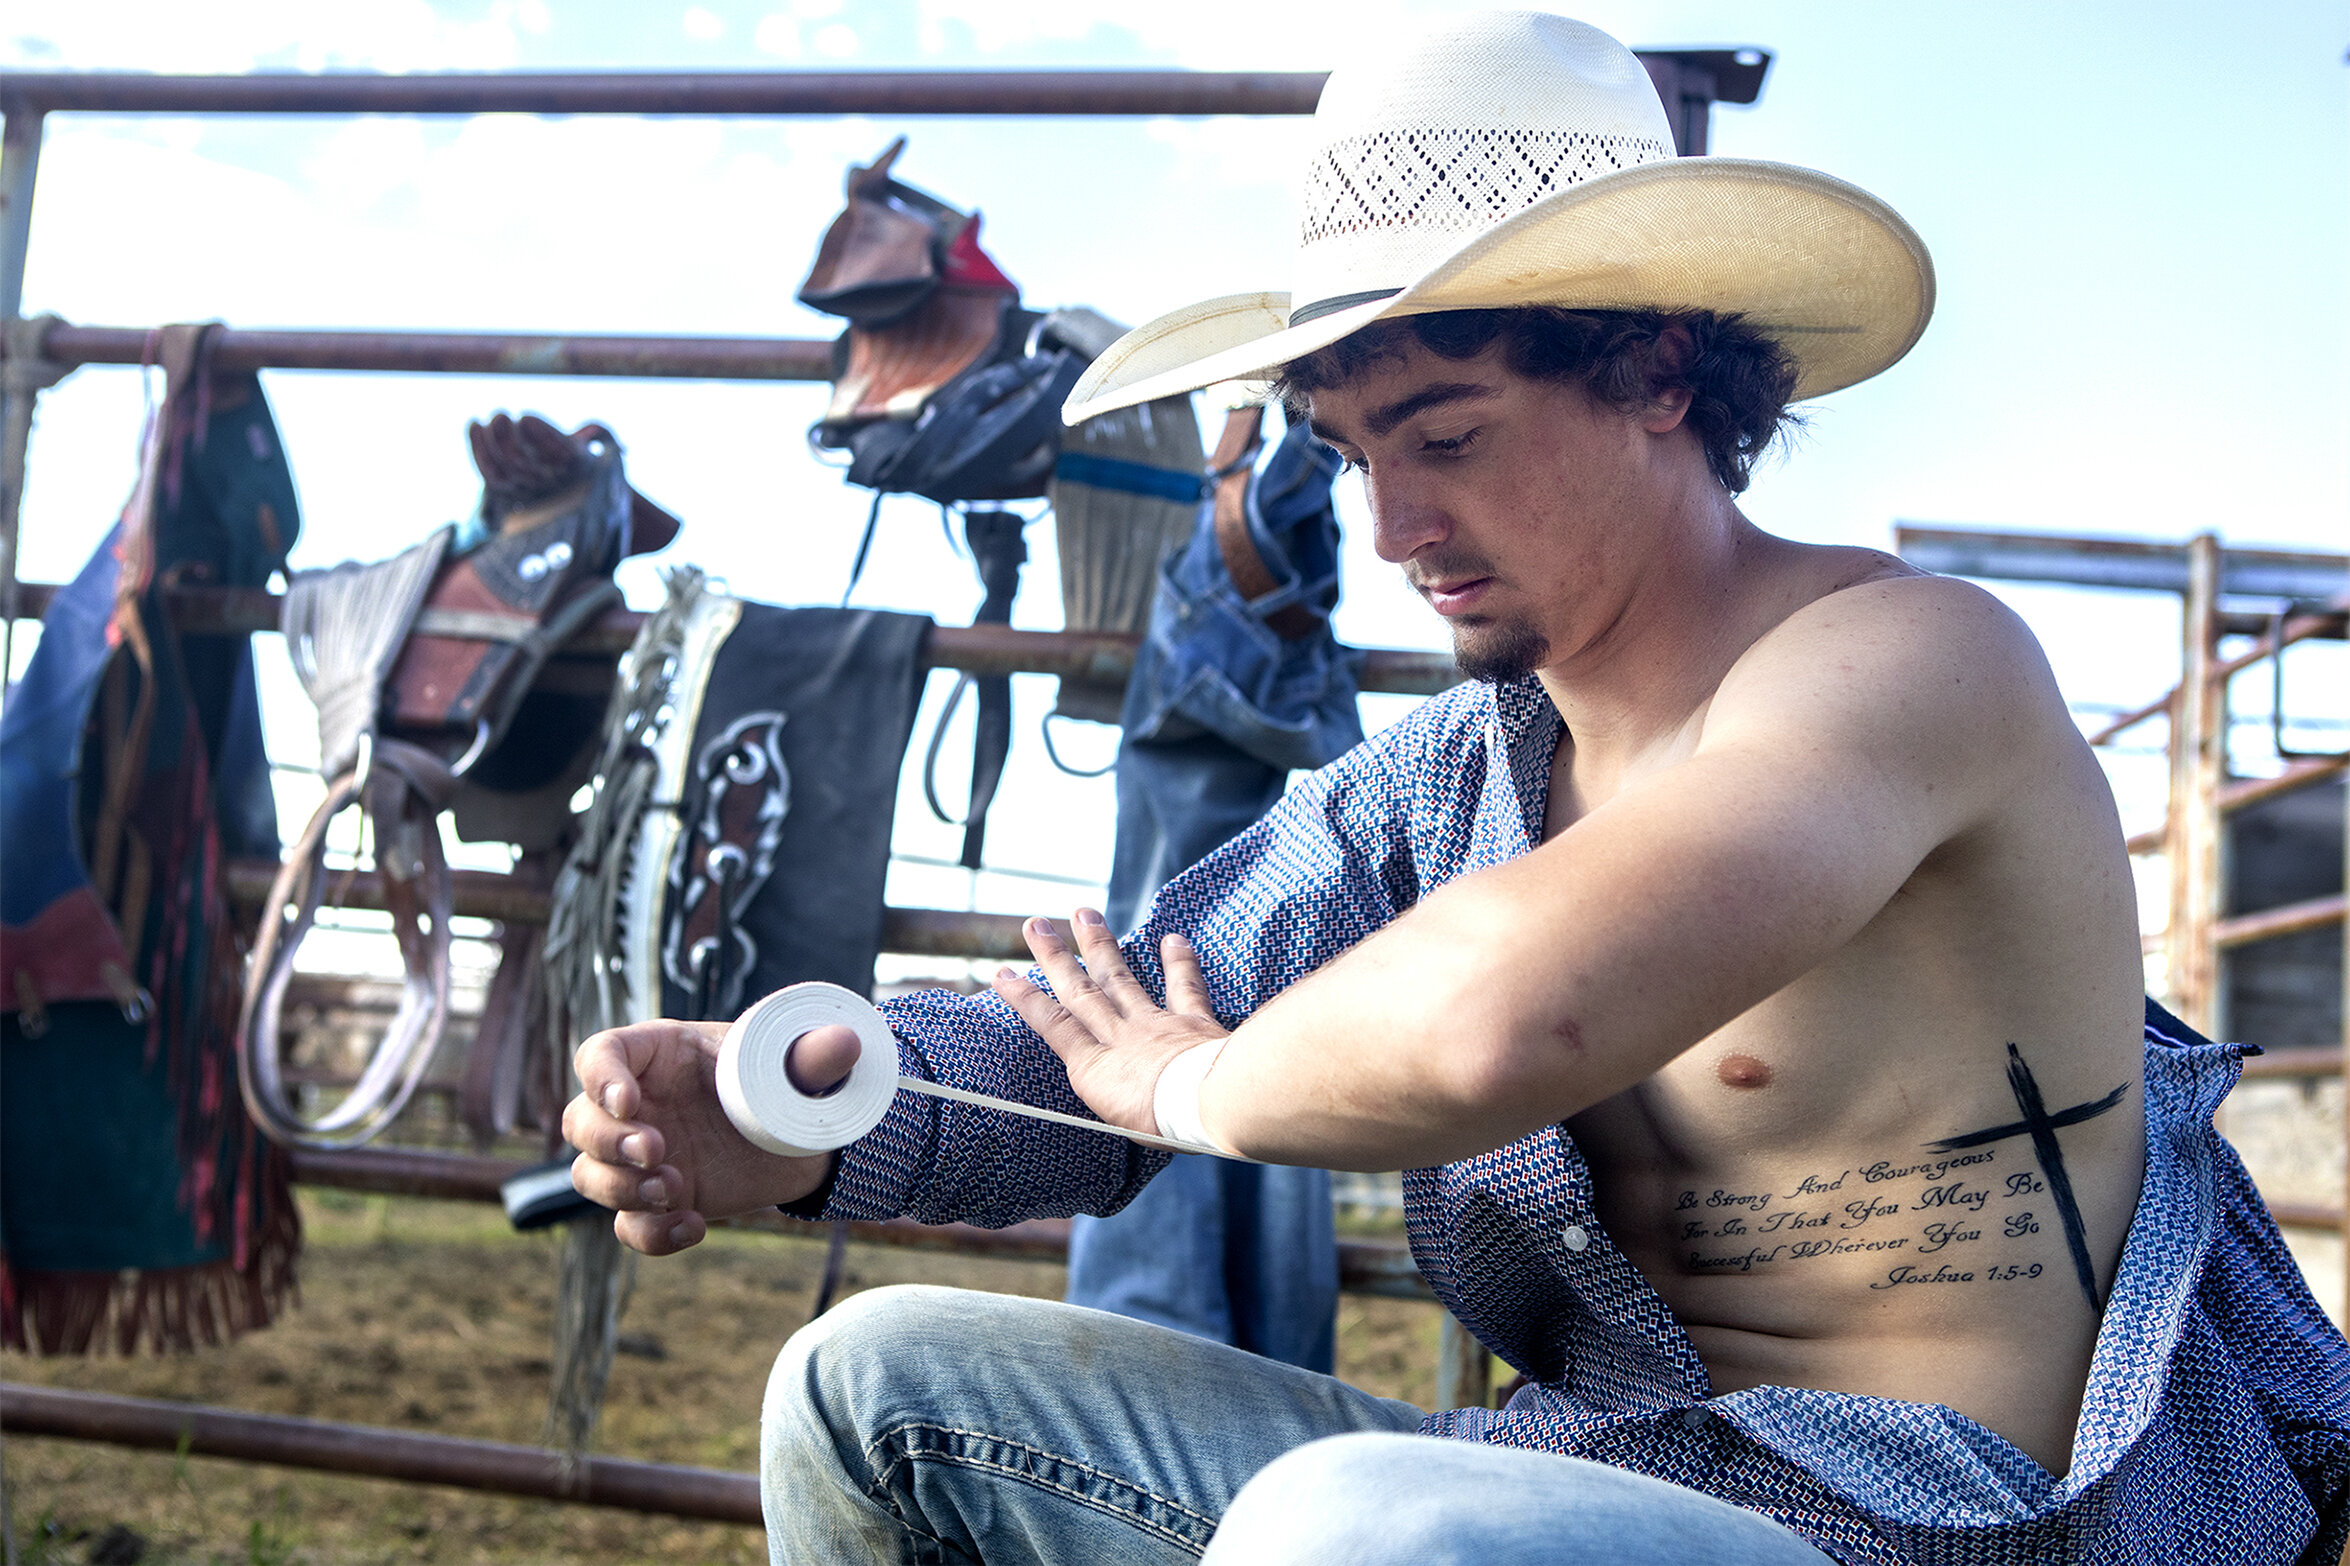  Donny Proffit tapes up his wrist ahead of the bareback competition on Friday, June 7, 2019. The tape holds things together and keeps the cowboys from pulling a muscle. Proffit’s tattoo reads “be strong and courageous for in that you may be successfu